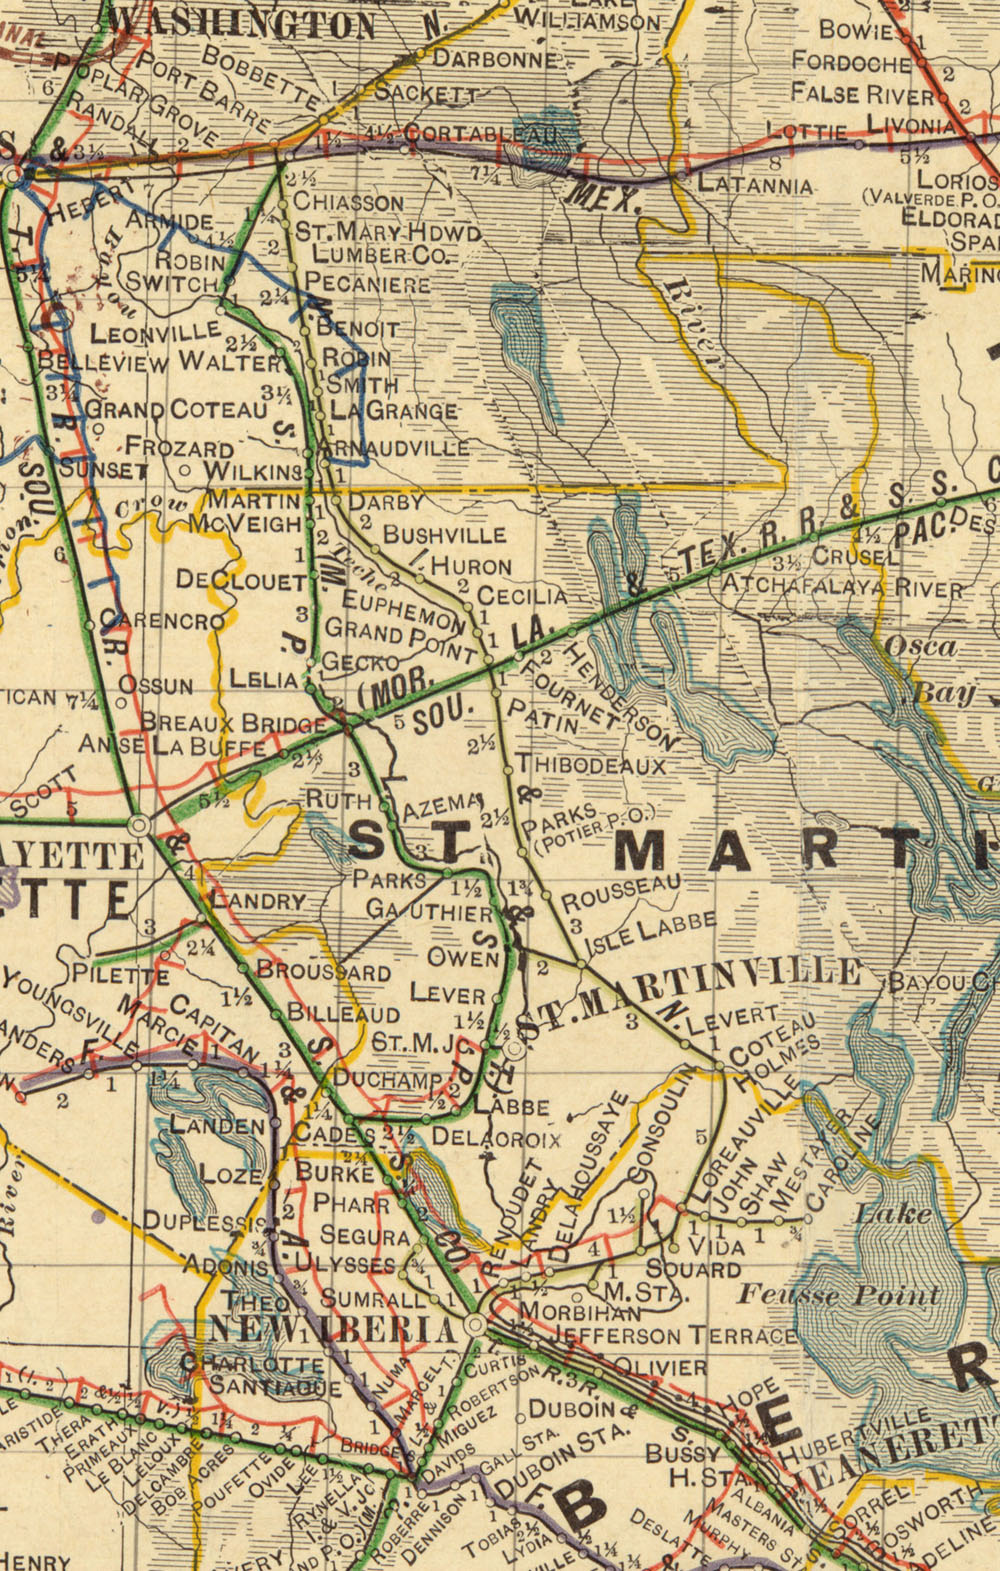 New Iberia & Northern Railroad Company, Map Showing Route in 1913.